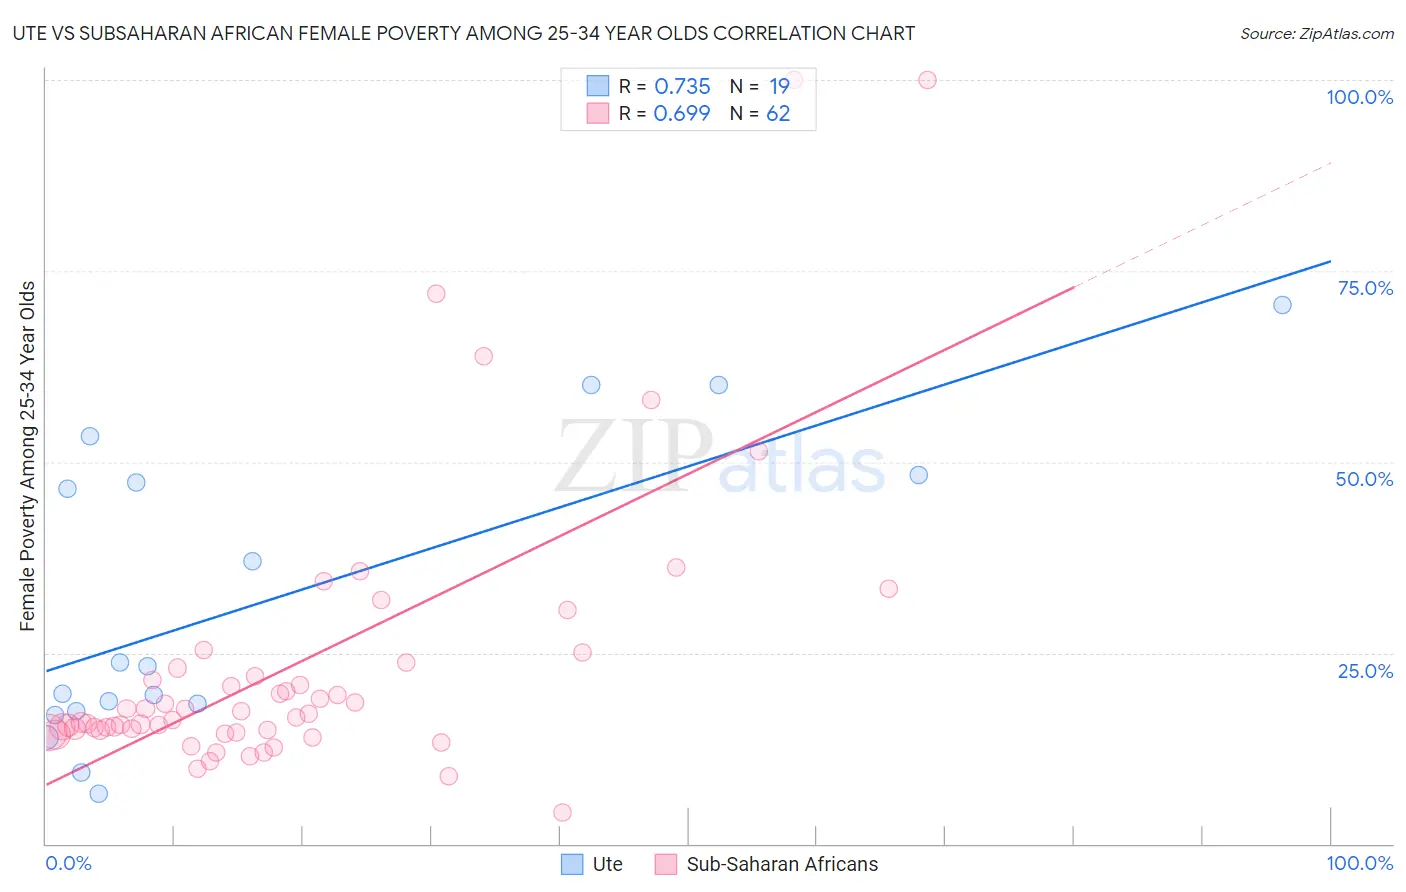 Ute vs Subsaharan African Female Poverty Among 25-34 Year Olds